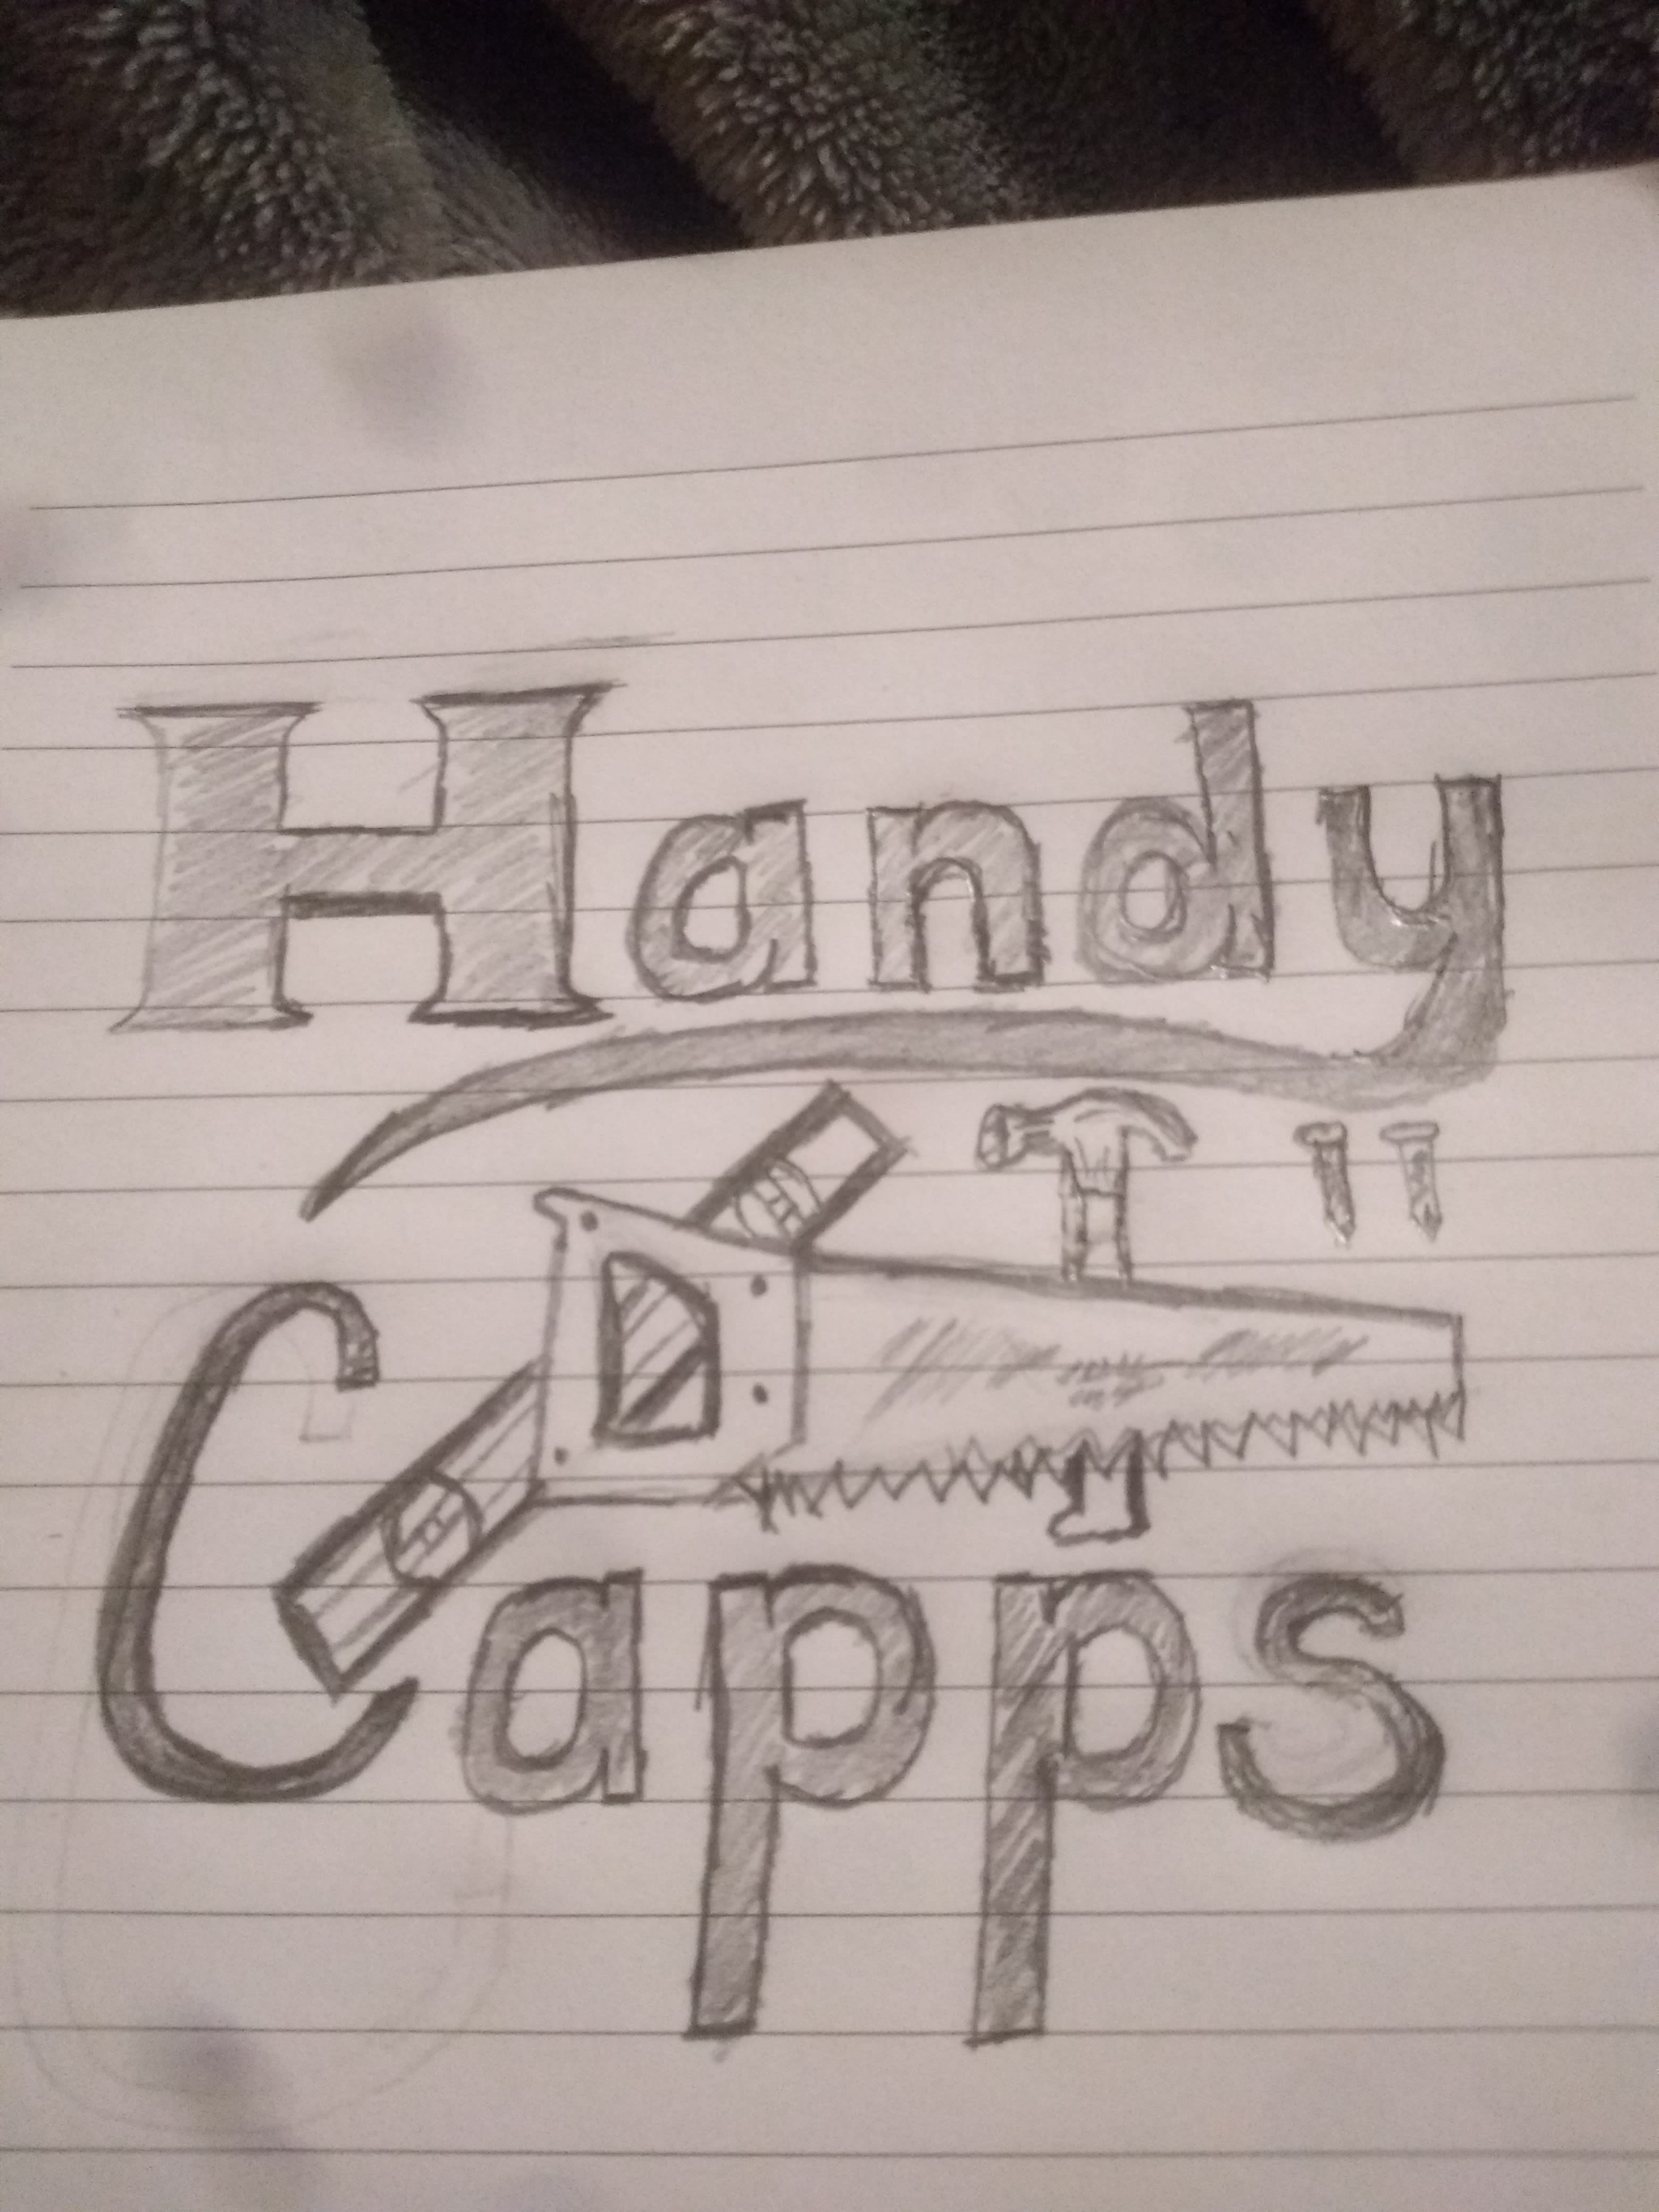 Handy Capps Services